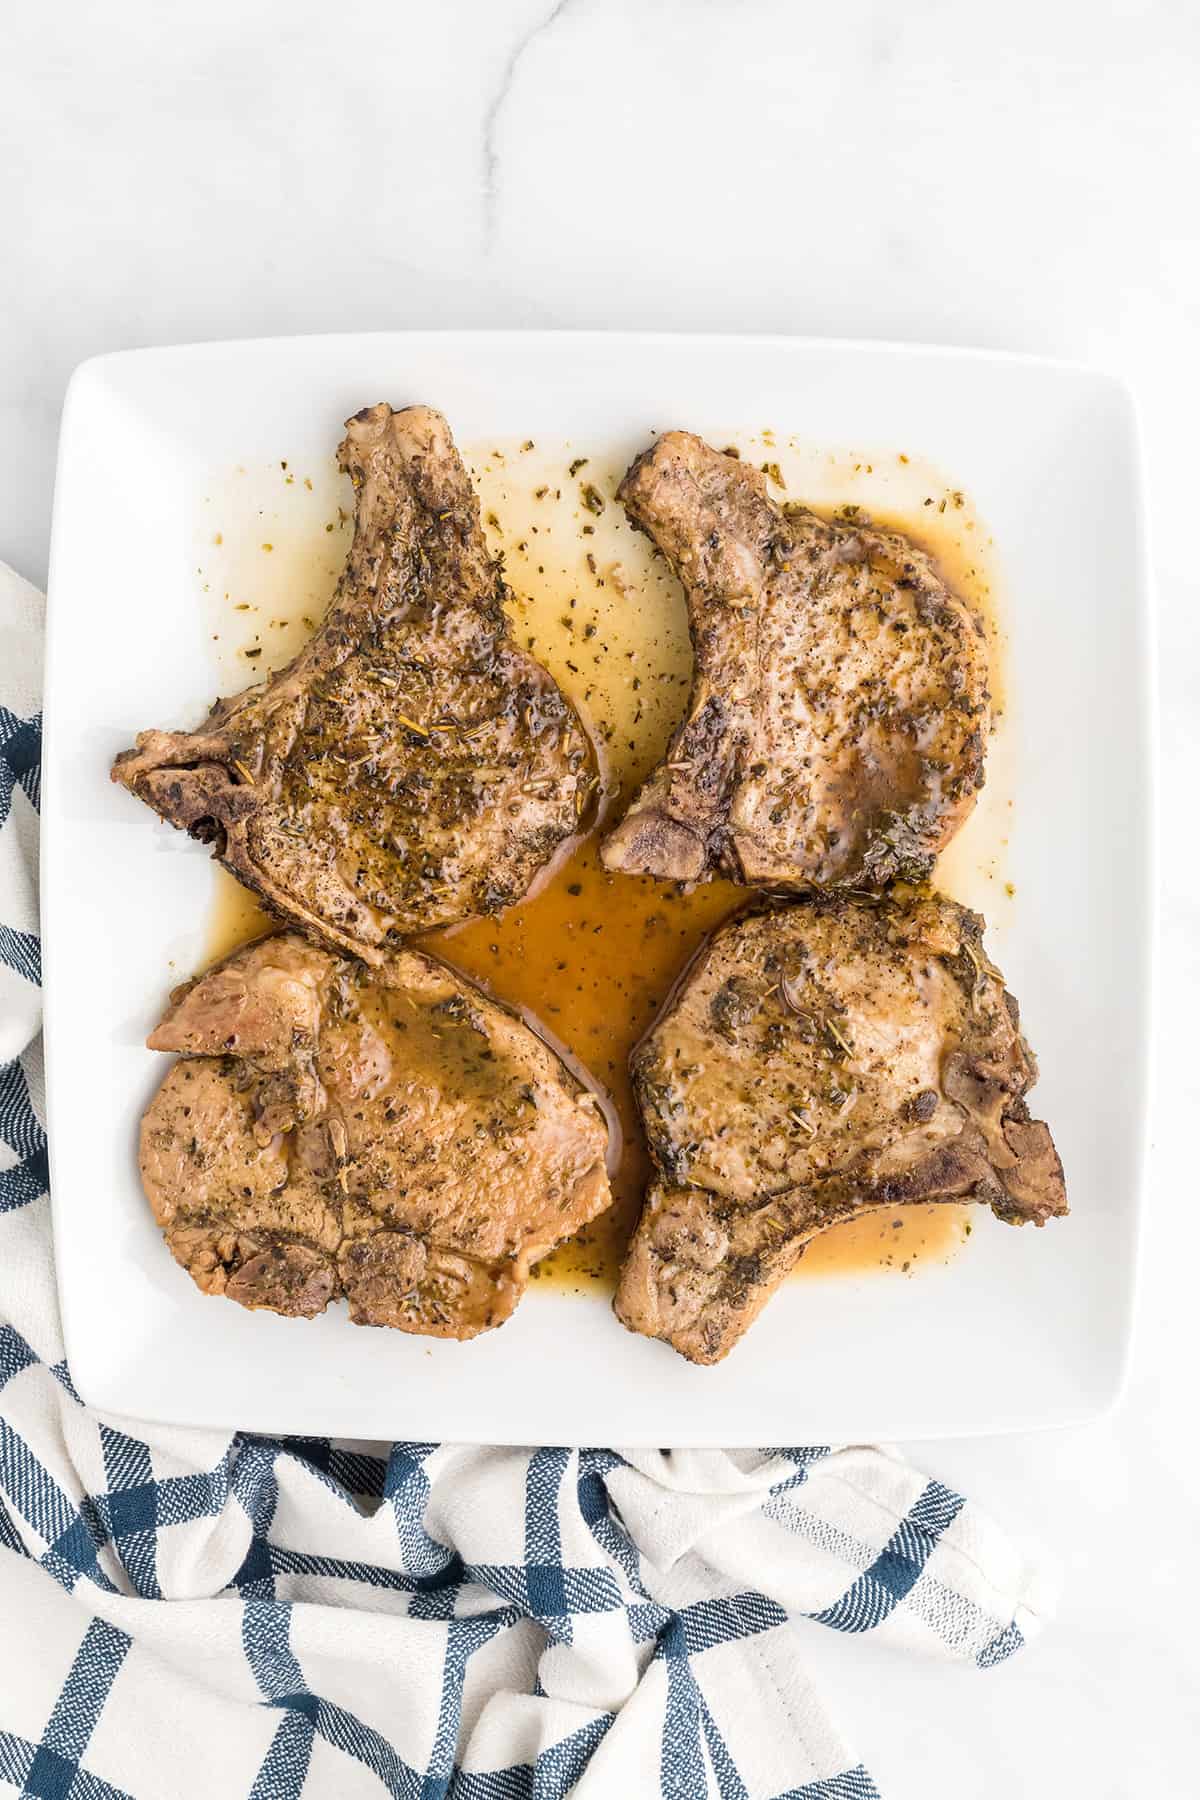 Pork chops and sauce on a serving plate.